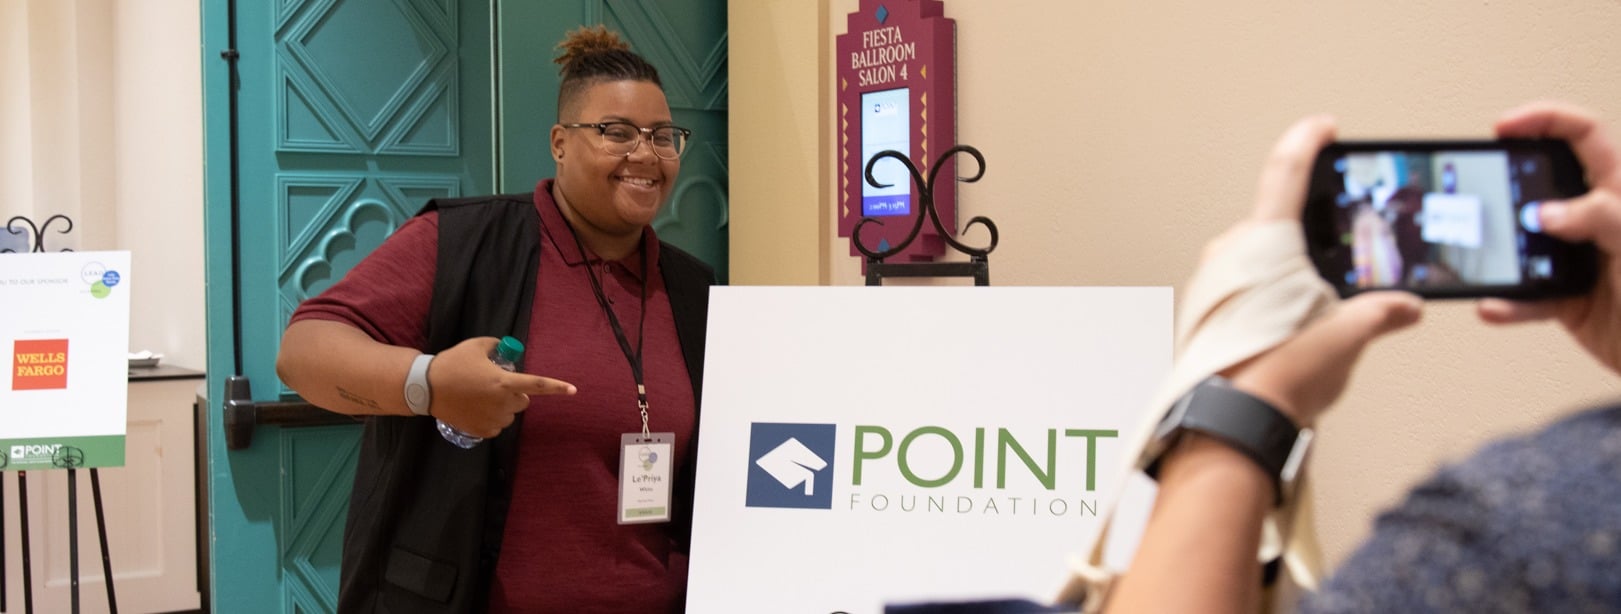 point scholar smiling pointing at sign